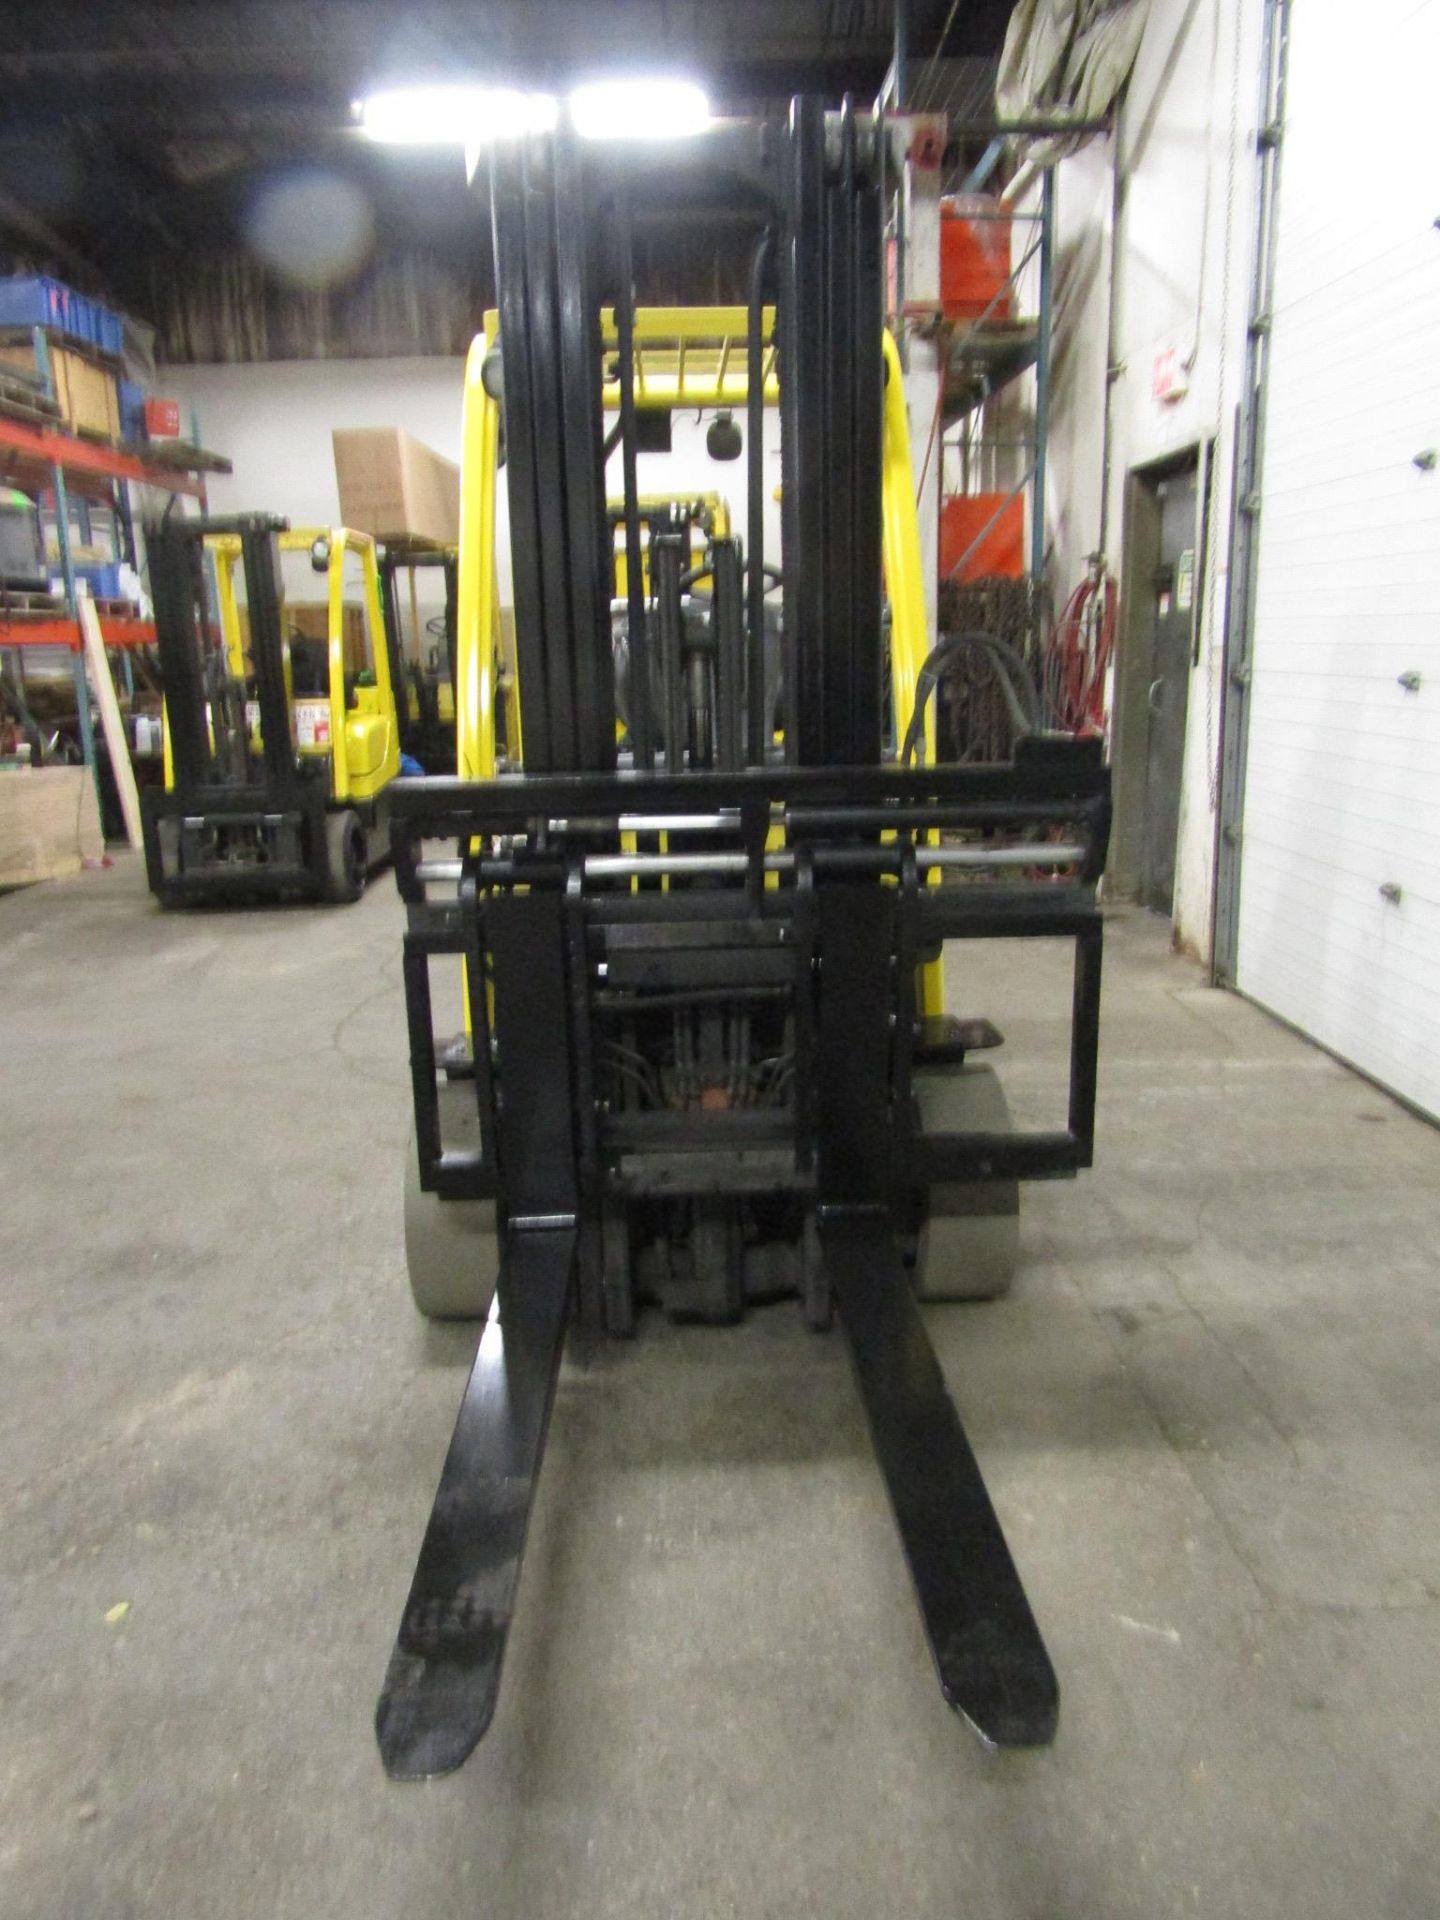 FREE CUSTOMS DOCS & 0 DUTY FEES - 2006 Hyster 6000lbs Capacity Forklift with 3-stage mast LPG - Image 2 of 2